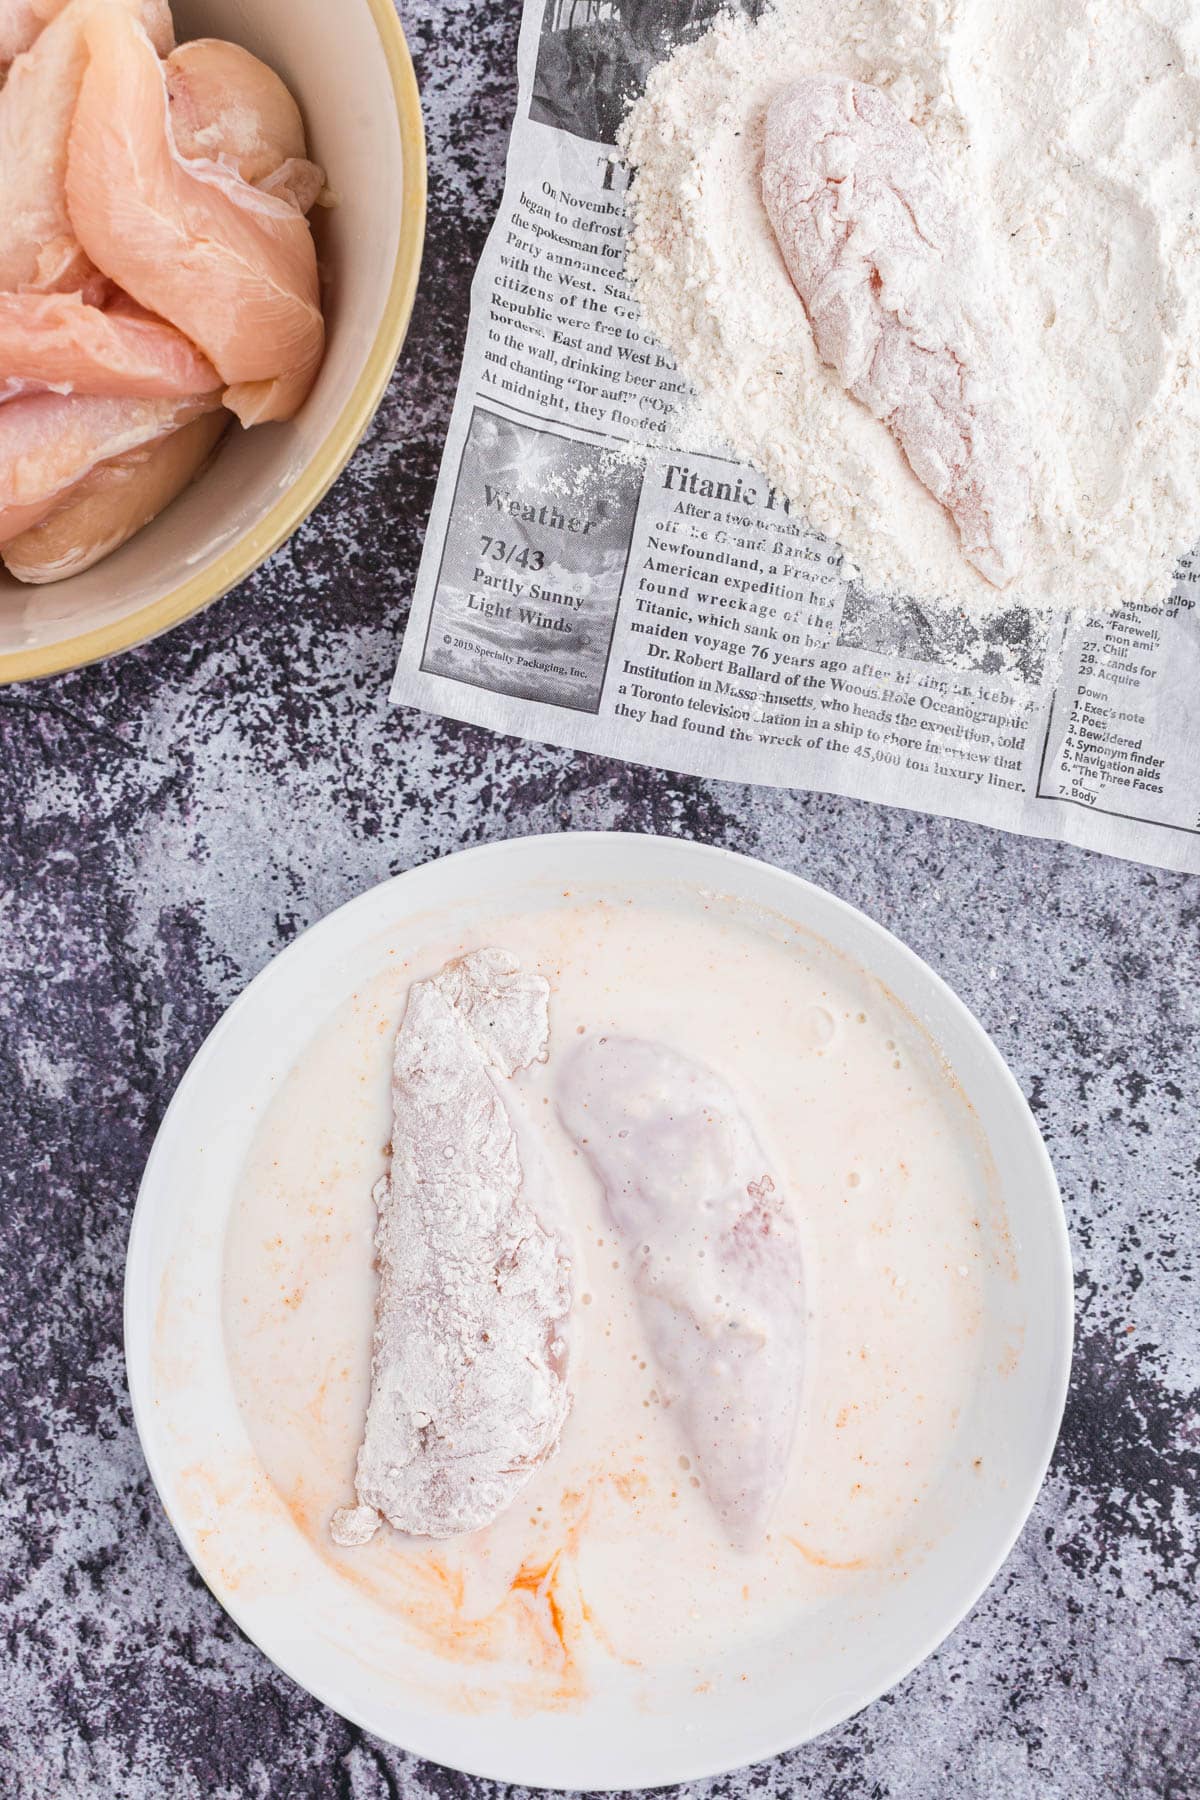 Overhead view of bowl with buttermilk mixture and flour-coated chicken tenders, bowl of raw chicken tenders, parchment paper with flour-coated chicken tenders.